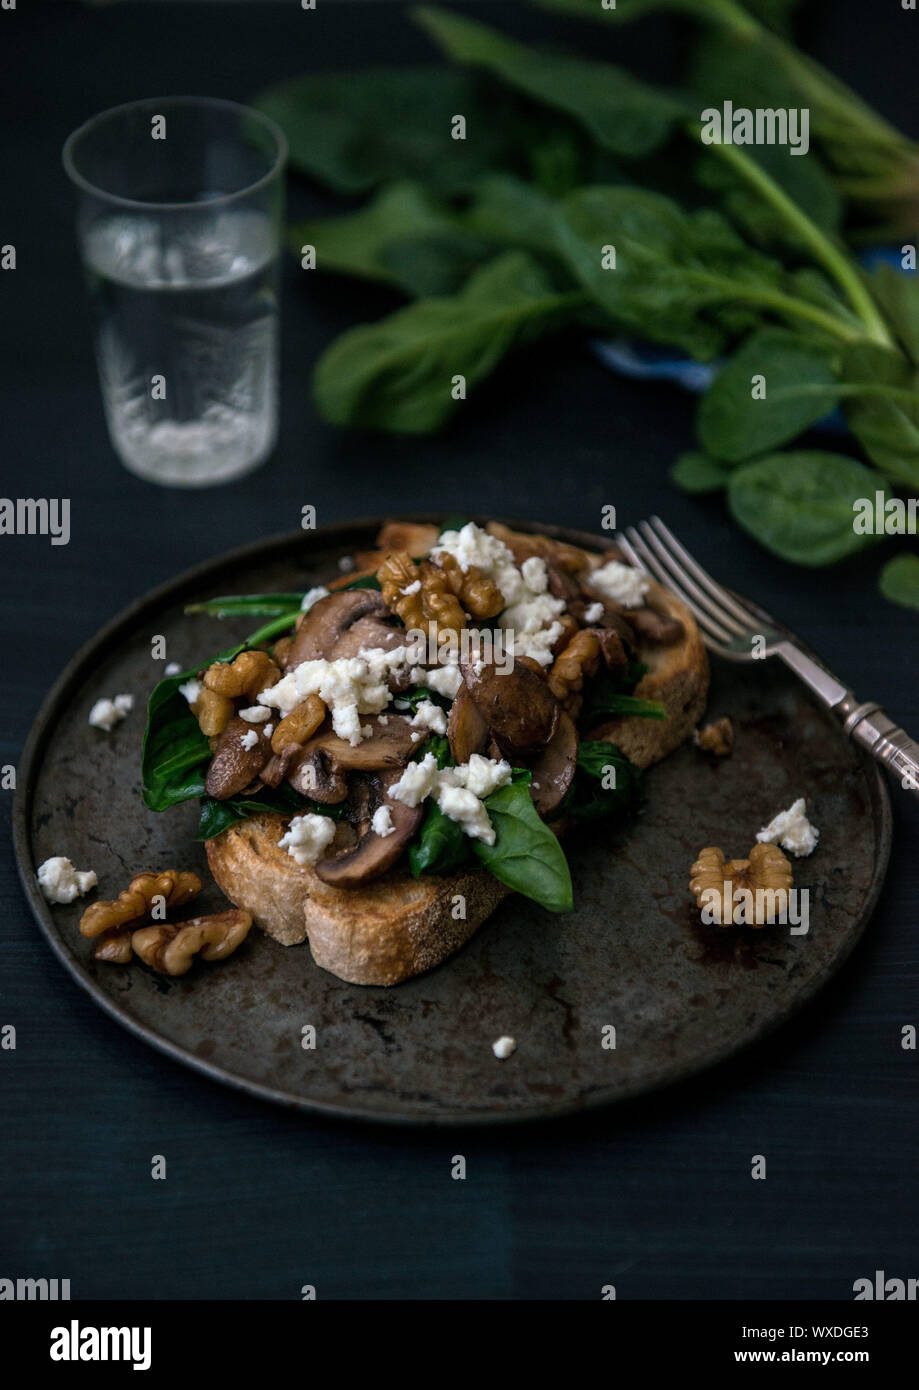 moody food photography of mushrooms, feta and spinach on toast Stock Photo